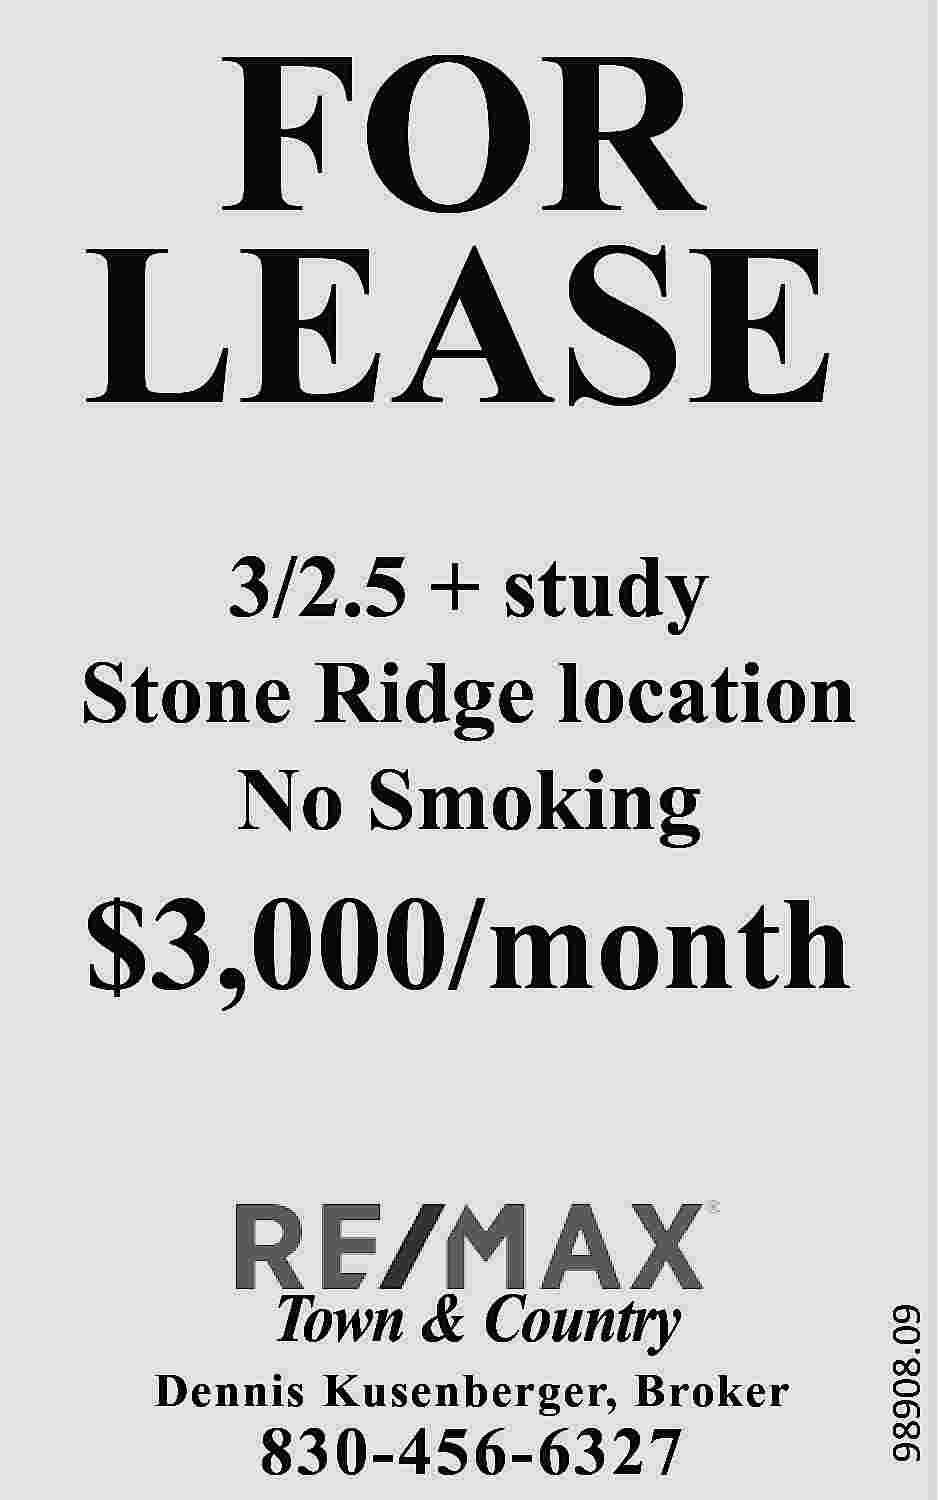 FOR LEASE 3/2.5 + study  FOR LEASE 3/2.5 + study Stone Ridge location No Smoking Town & Country Dennis Kusenberger, Broker 830-456-6327 98908.09 $3,000/month